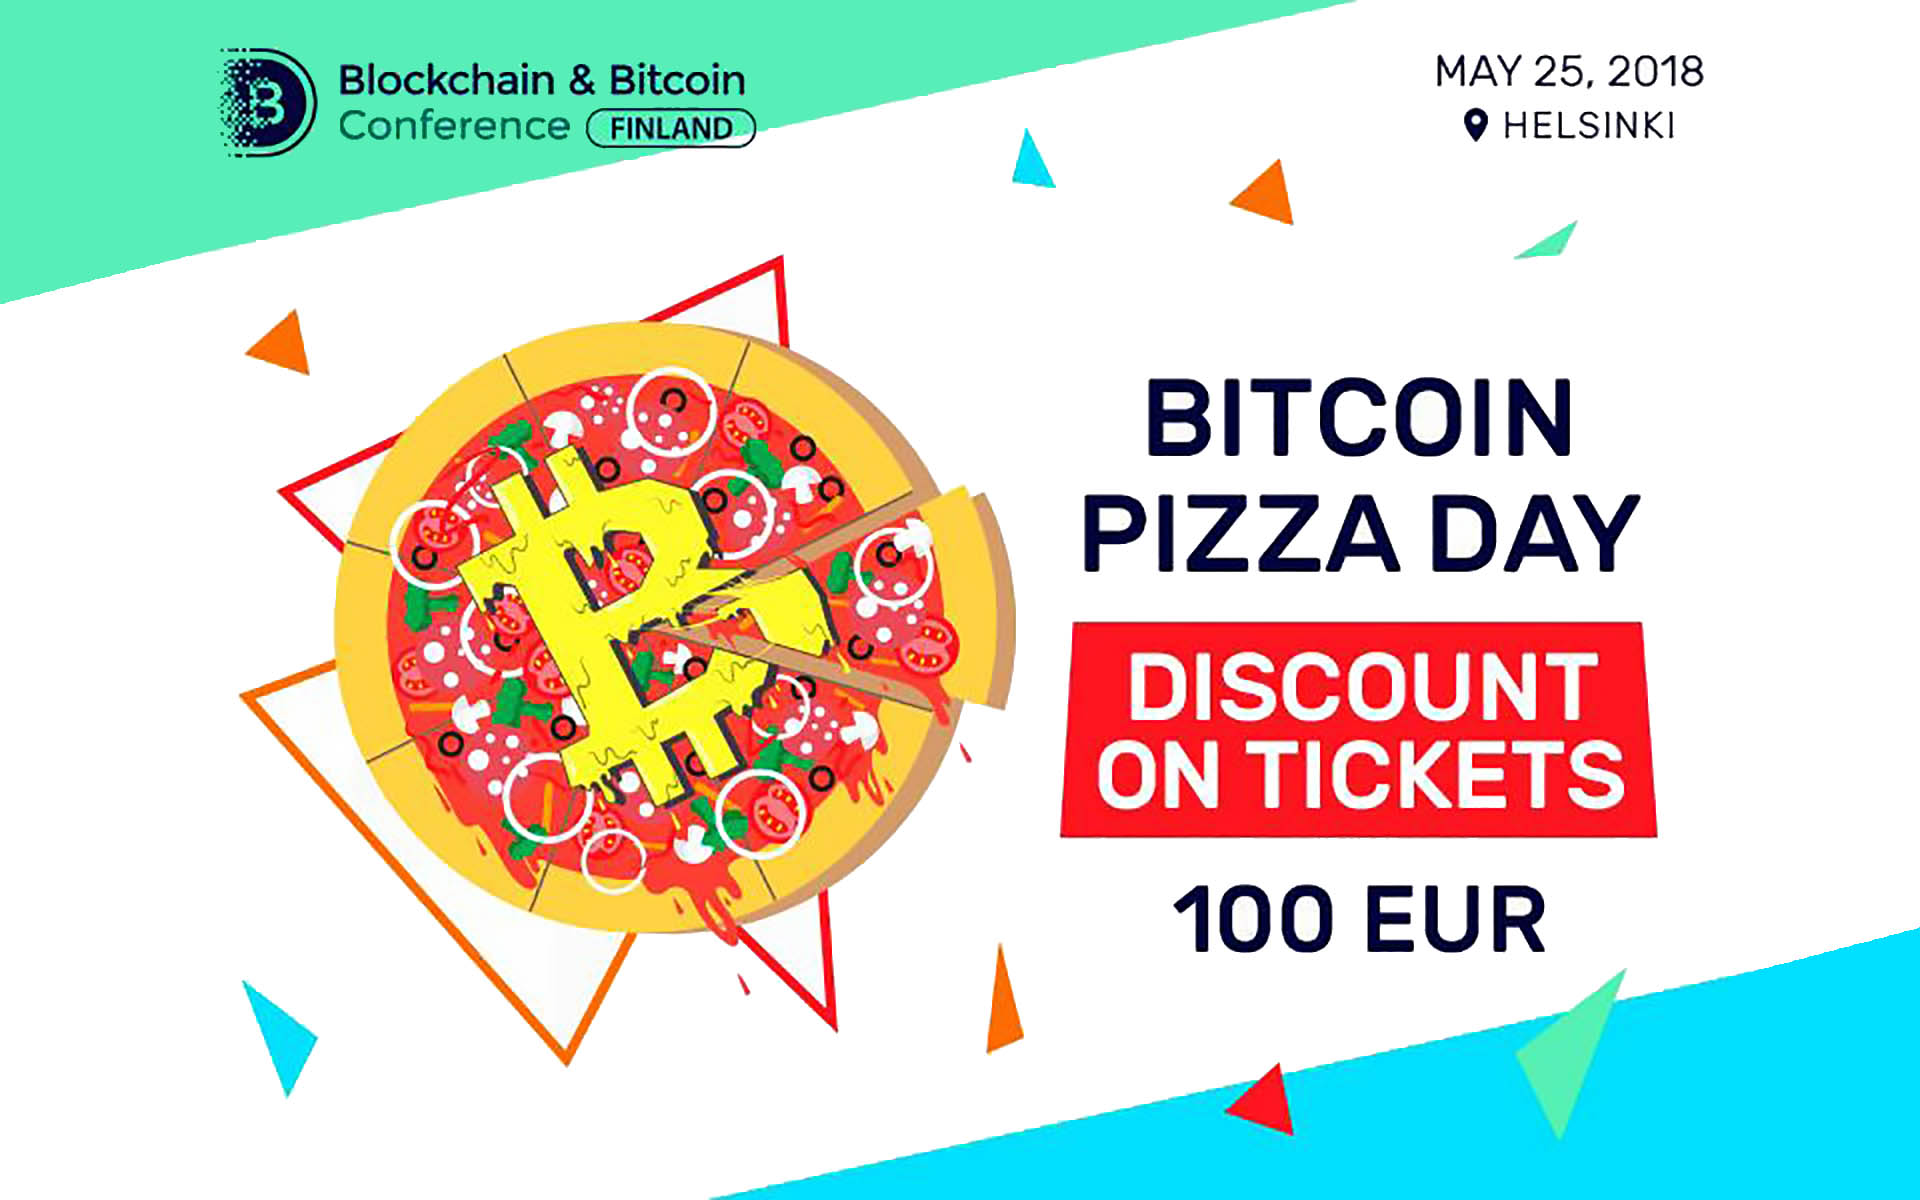 Pizza Day Celebration: A Ticket for Blockchain & Bitcoin Conference Finland for 100€!